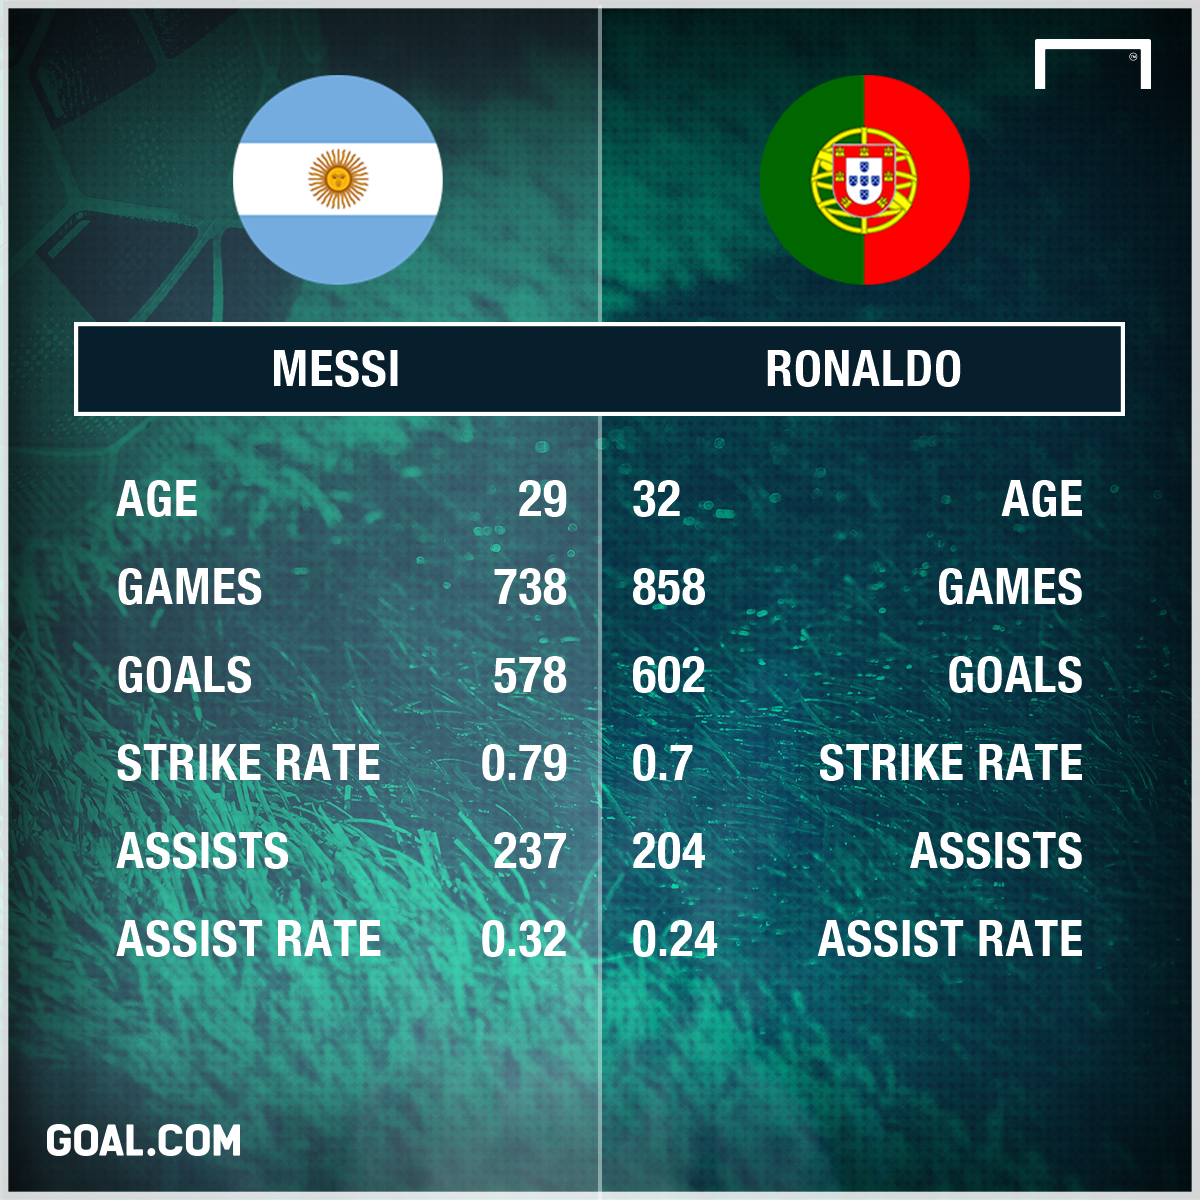 lionel-messi-cristiano-ronaldo-stats-ps_wekhiwdl8rtizch3ryuhu85d.png